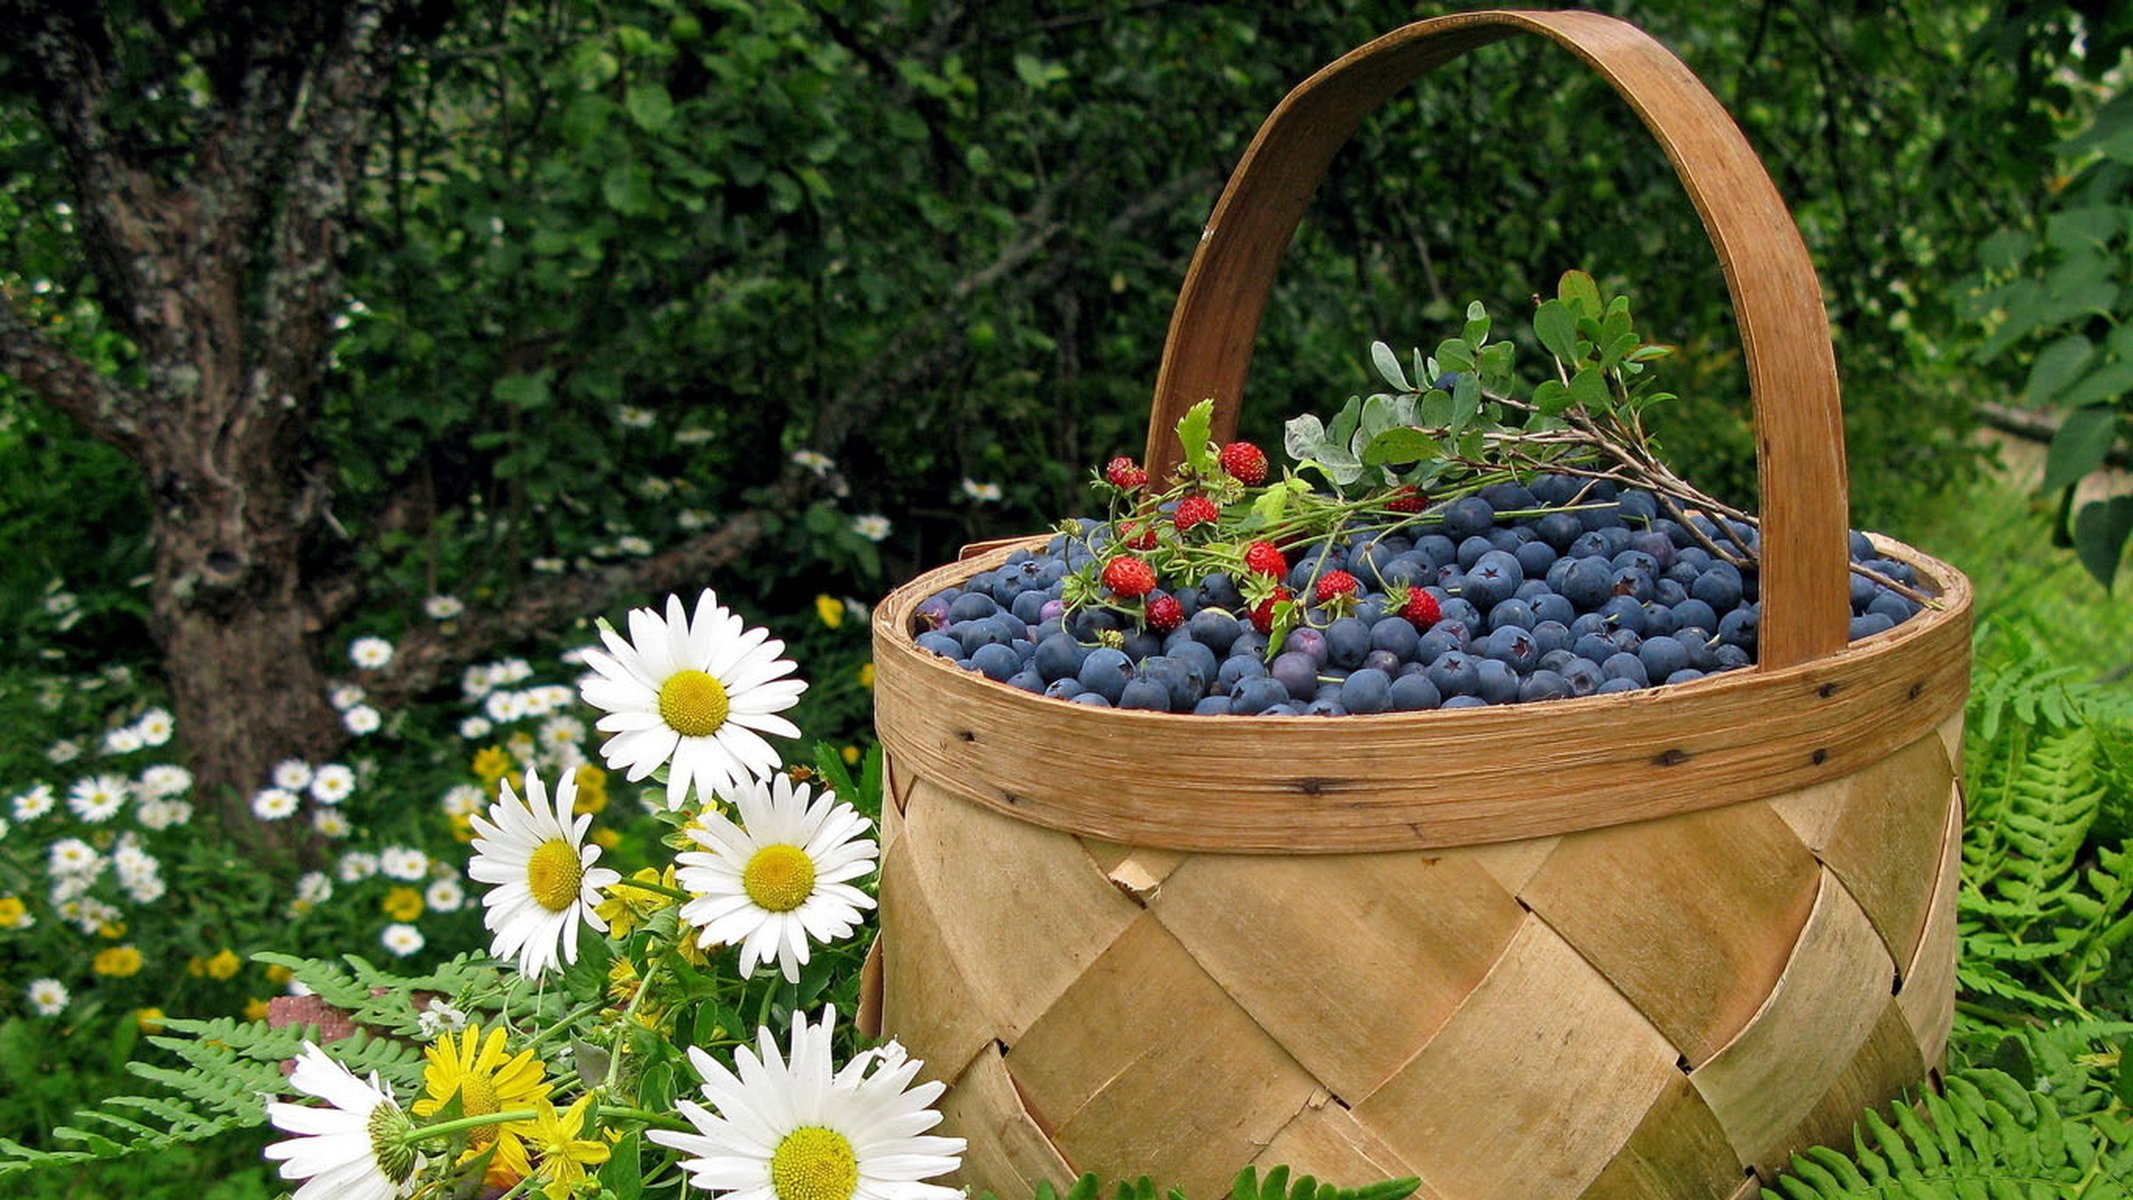 Berries in a basket near daisies on the background of the garden